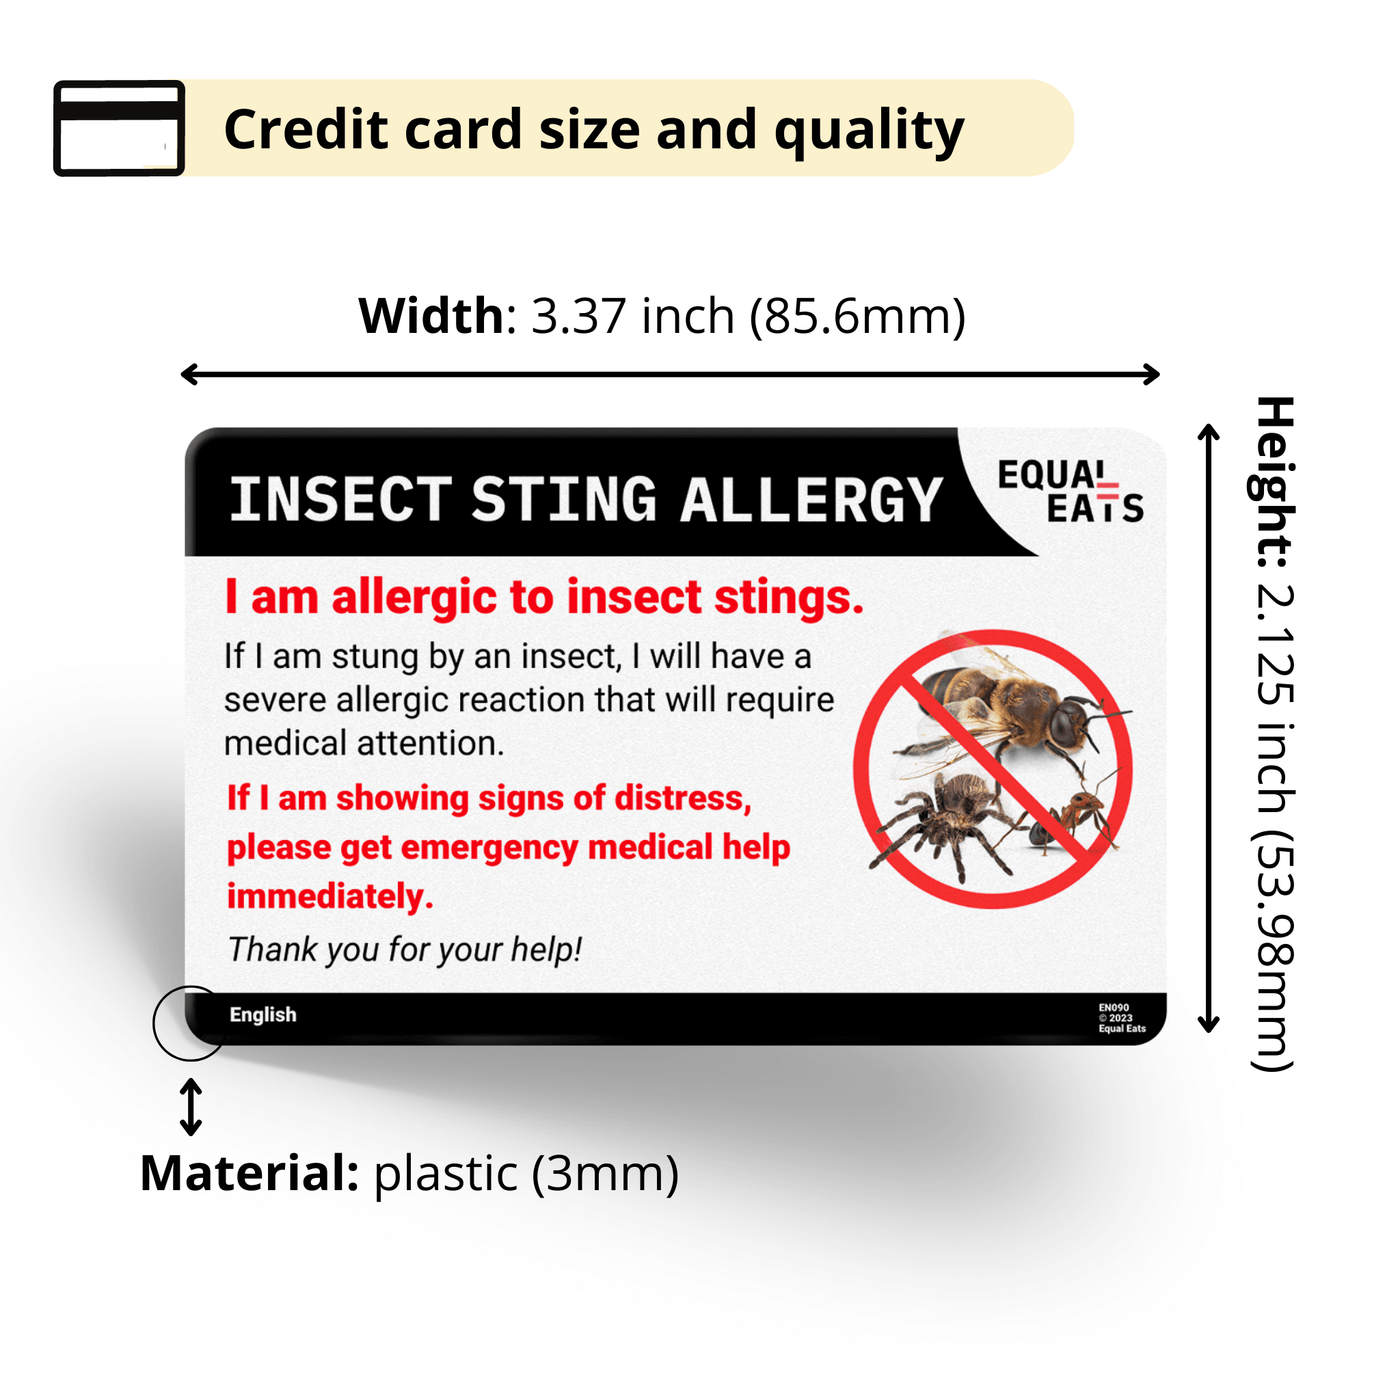 Equal Eats Insect Sting Allergy Translation Card